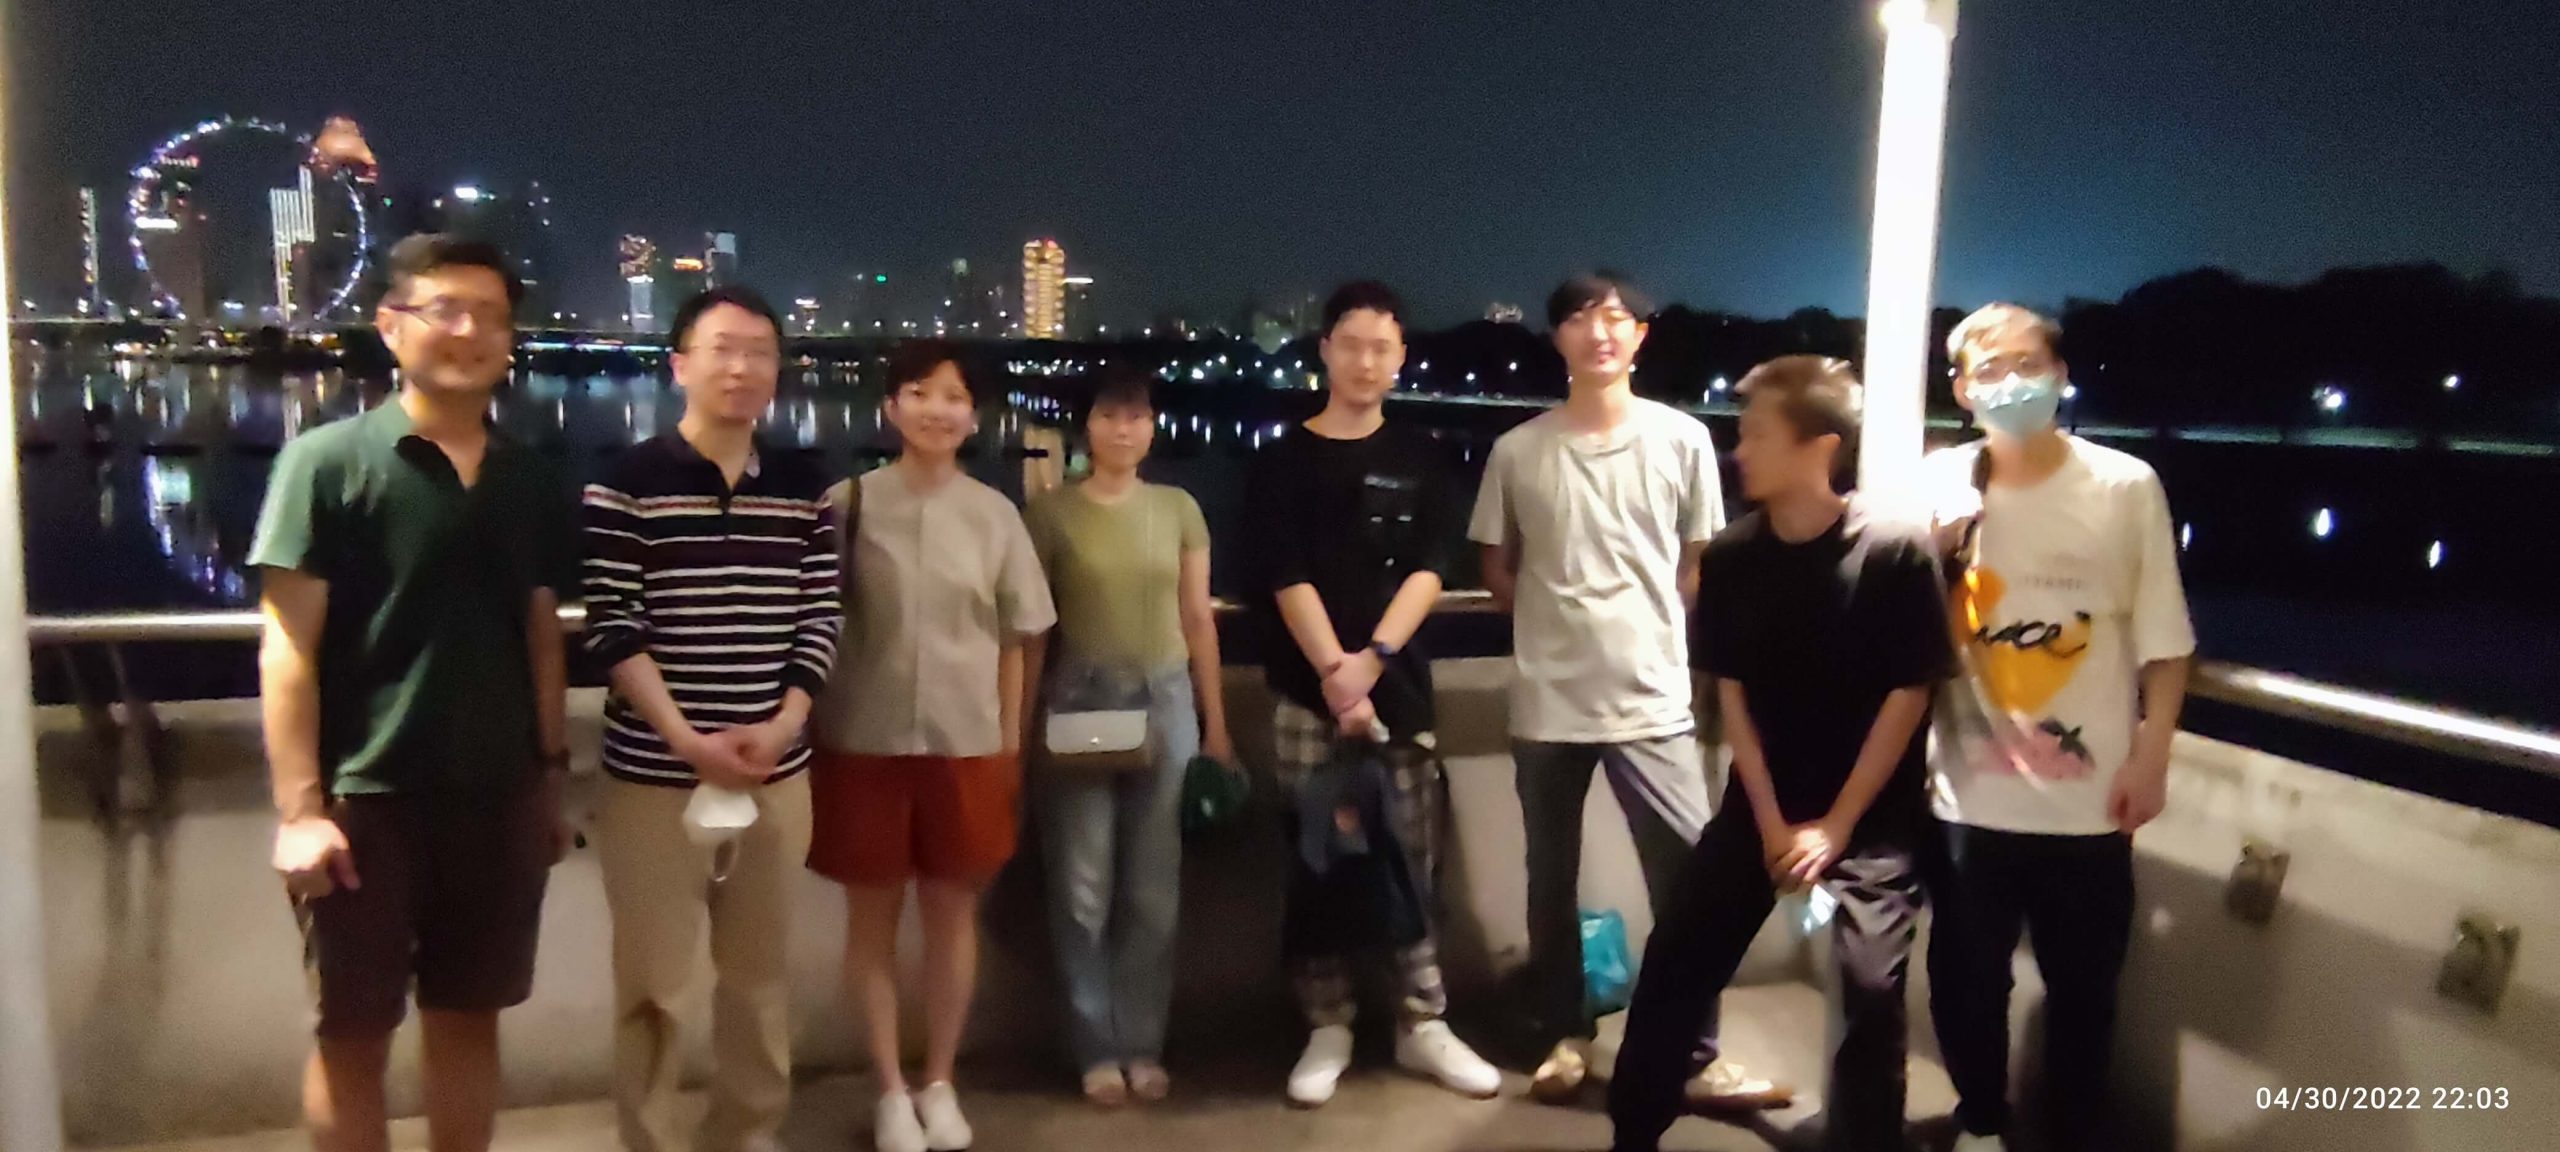 You are currently viewing Fantastic Dinner and Walk with Prof. Xiong Jie